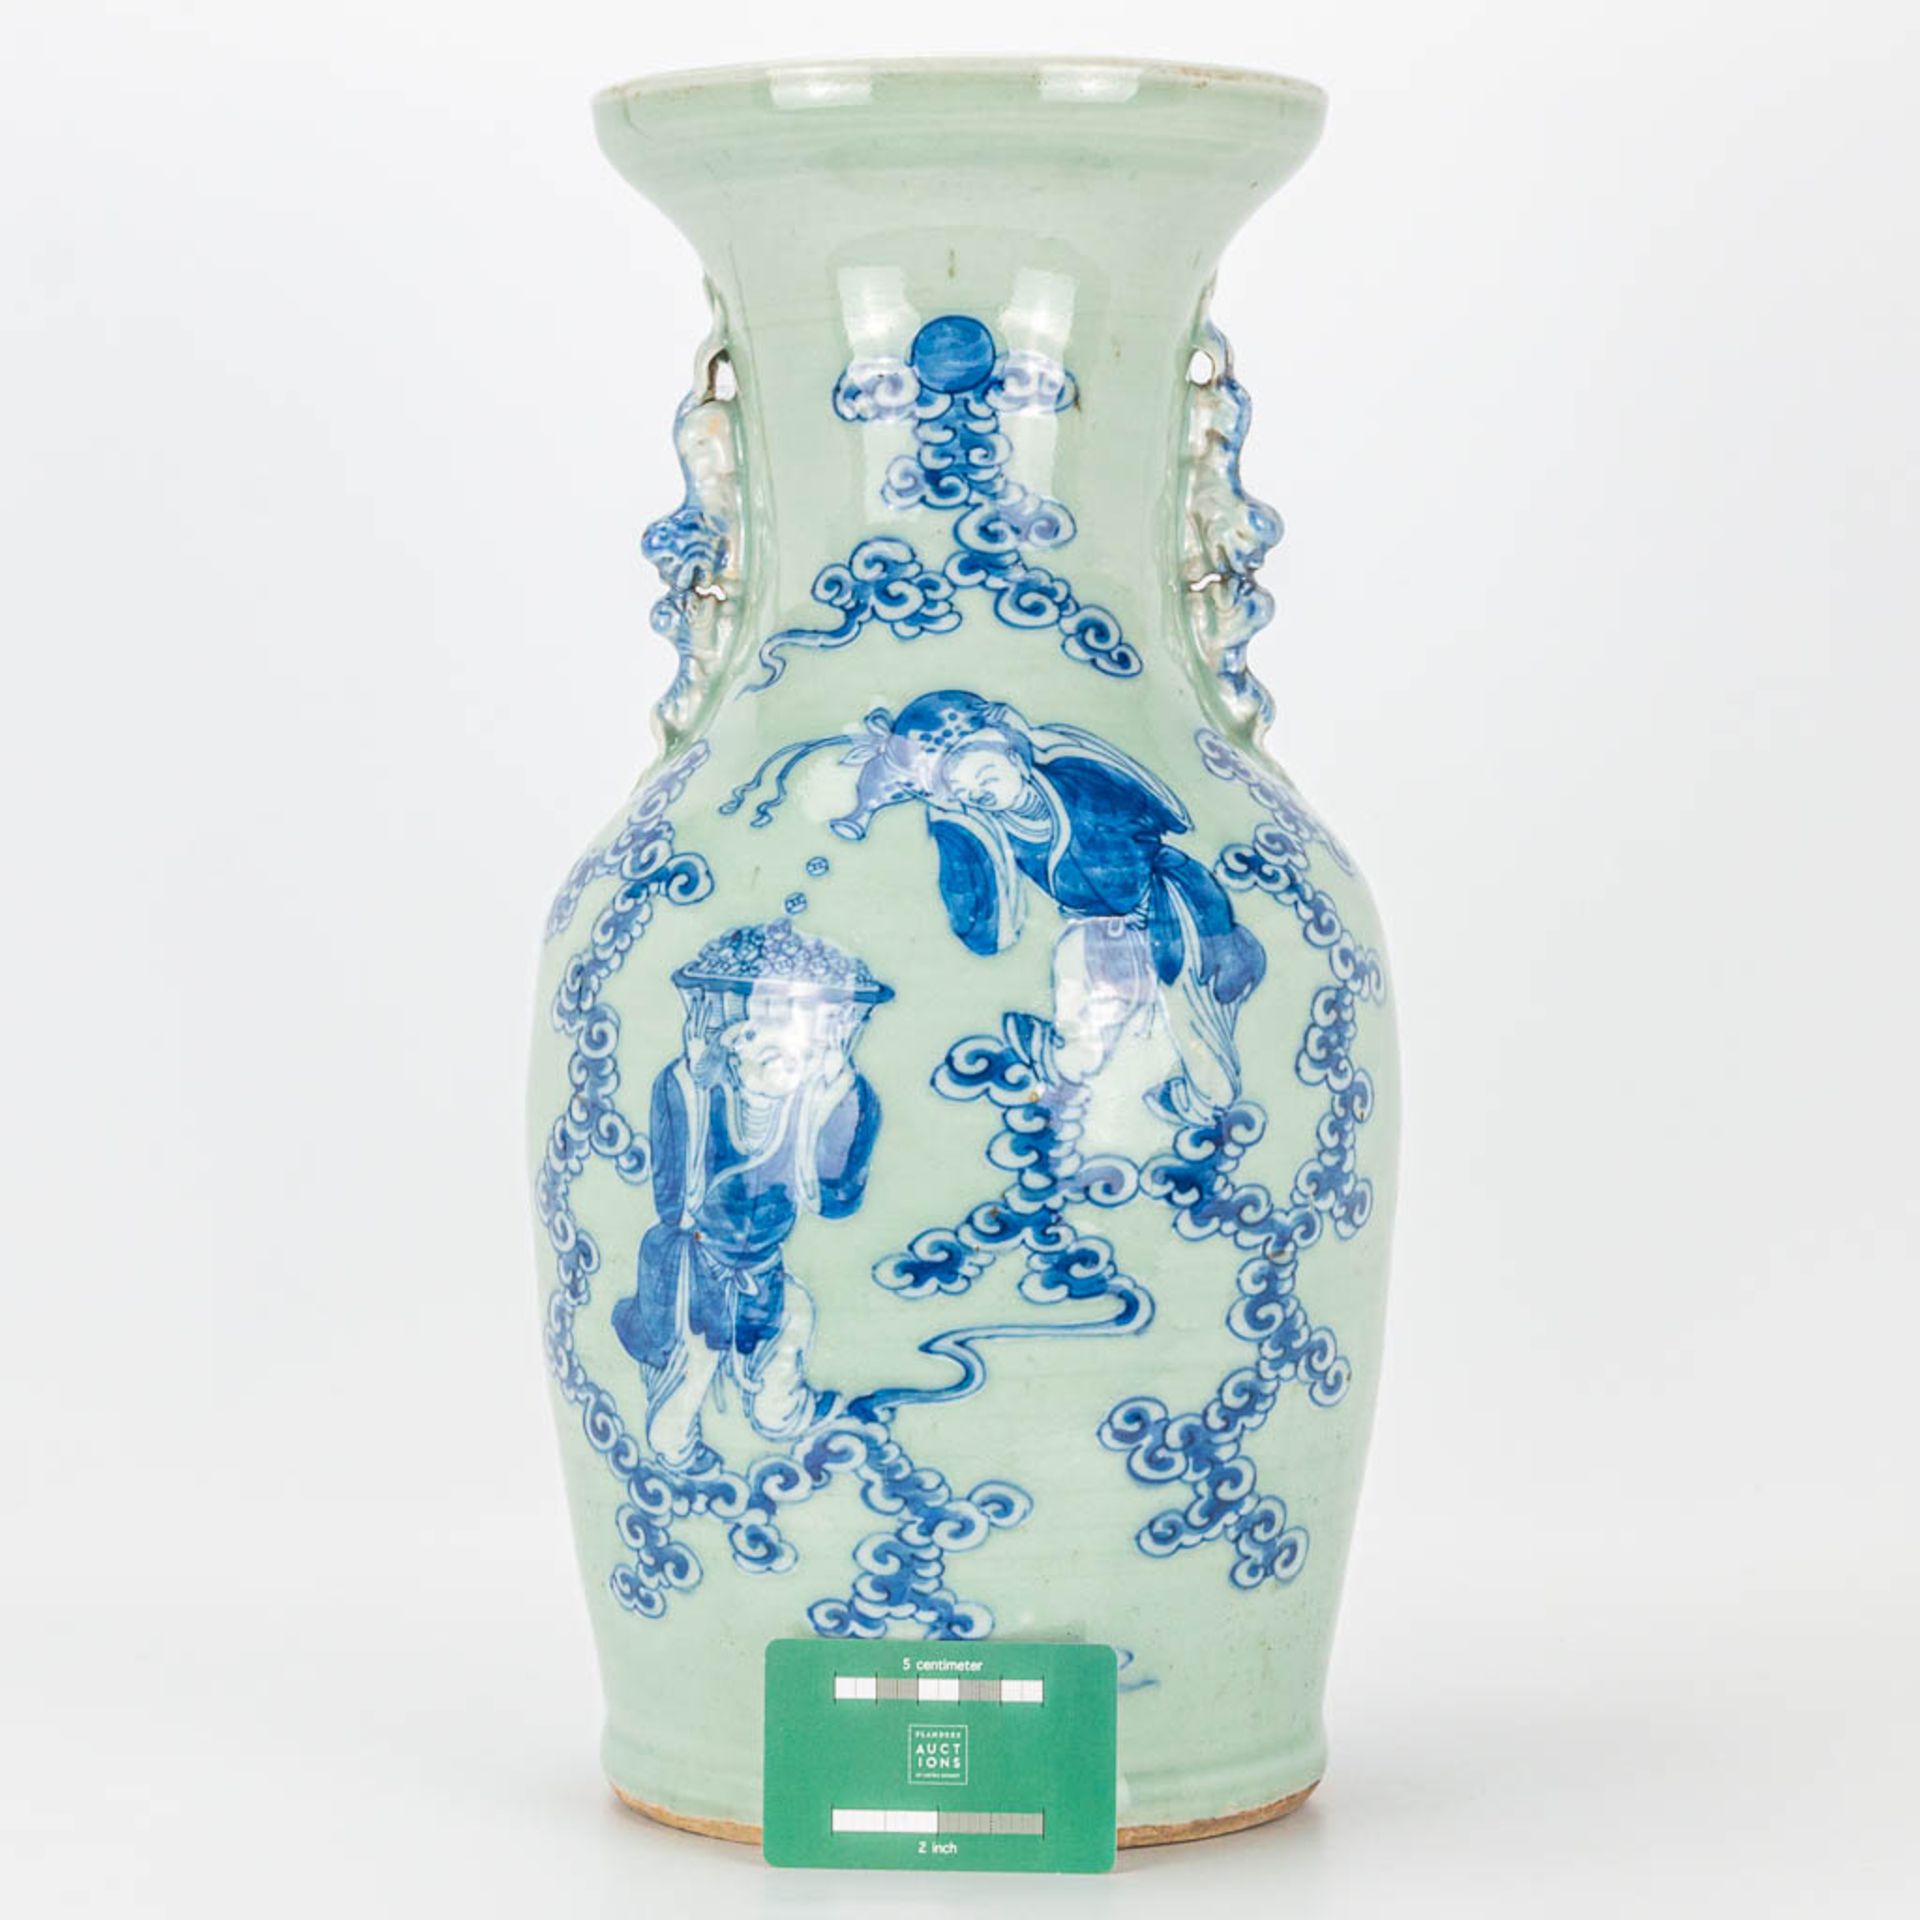 A vase made of Chinese porcelain with a blue-white decor. 19th/20th century. - Image 8 of 14